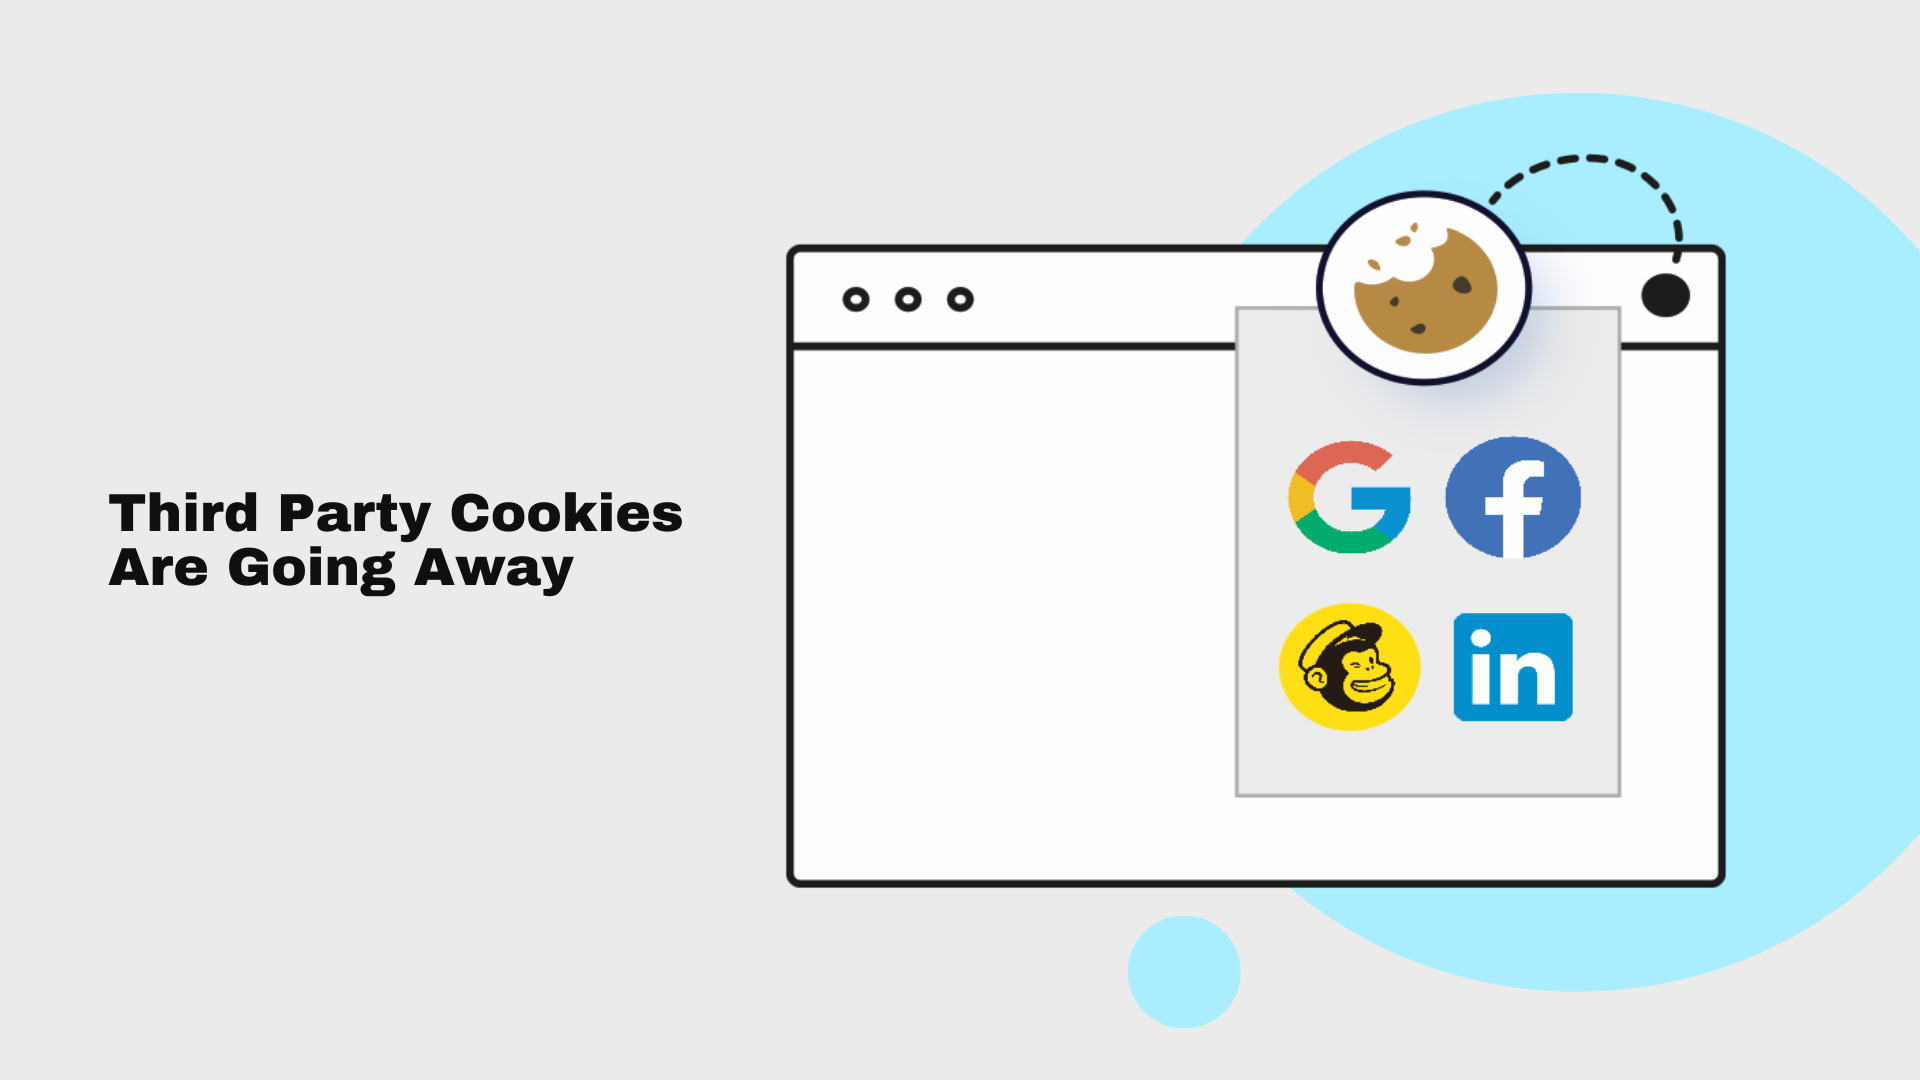 Third-party cookie tracking is going away and being replaced by GA4